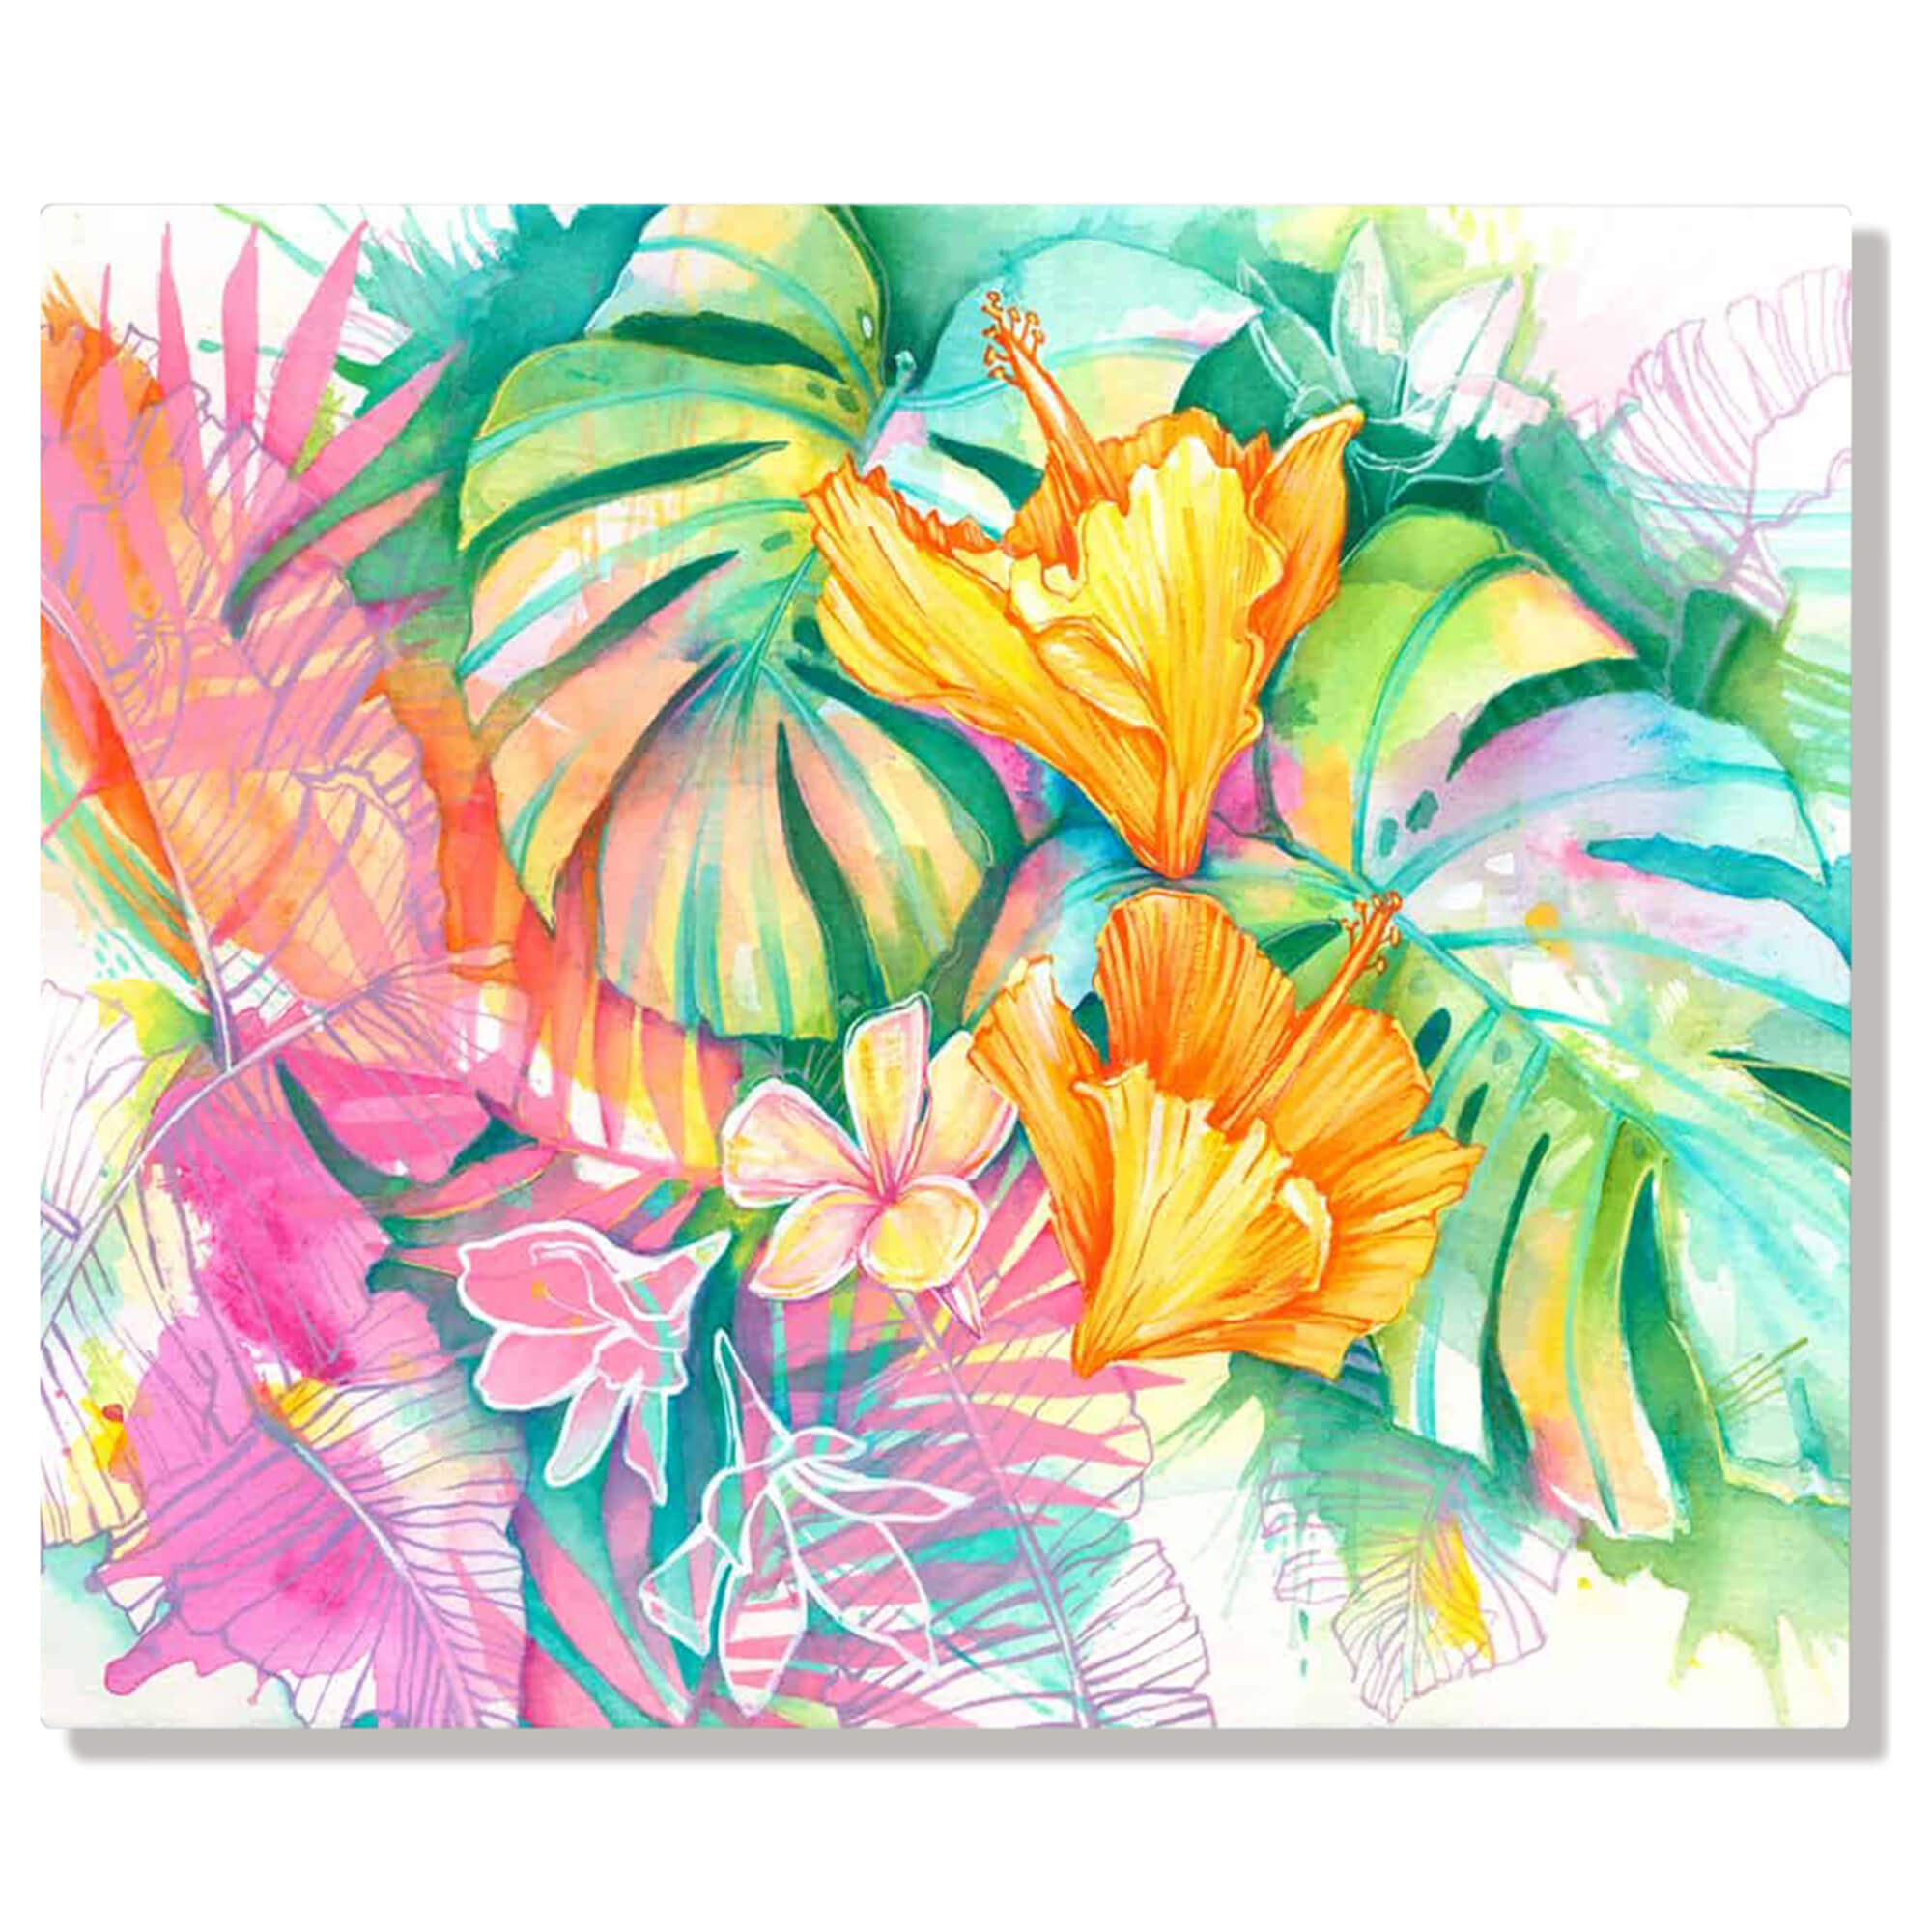 A metal art print of the popular Monstera plant amongst a colorful backdrop of island flora by Hawaii artist Lauren Roth